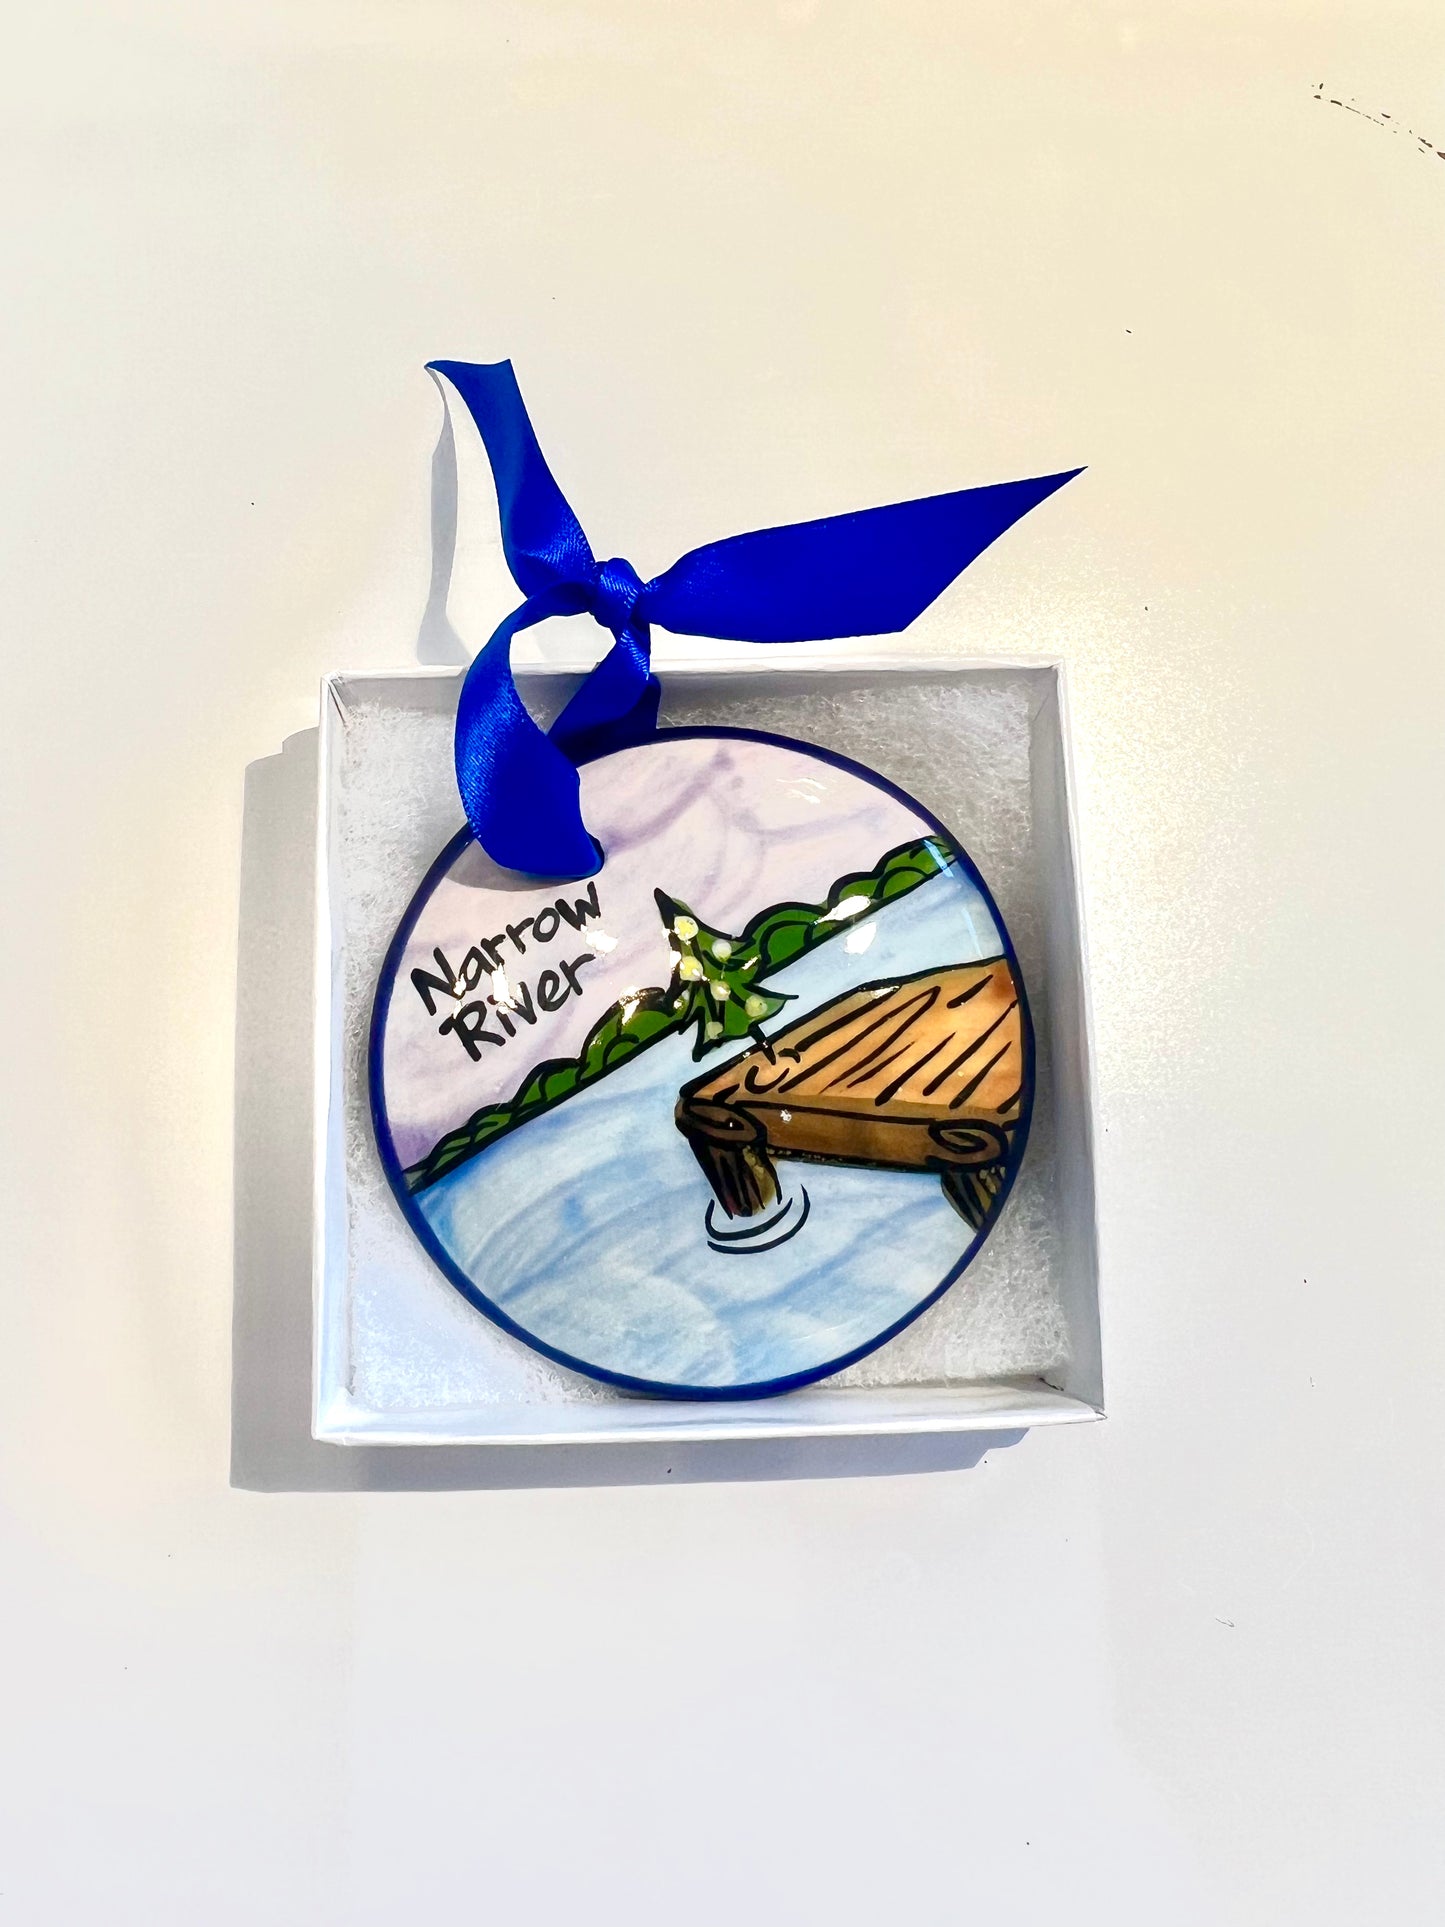 Narrow River Hand-Painted Ornament